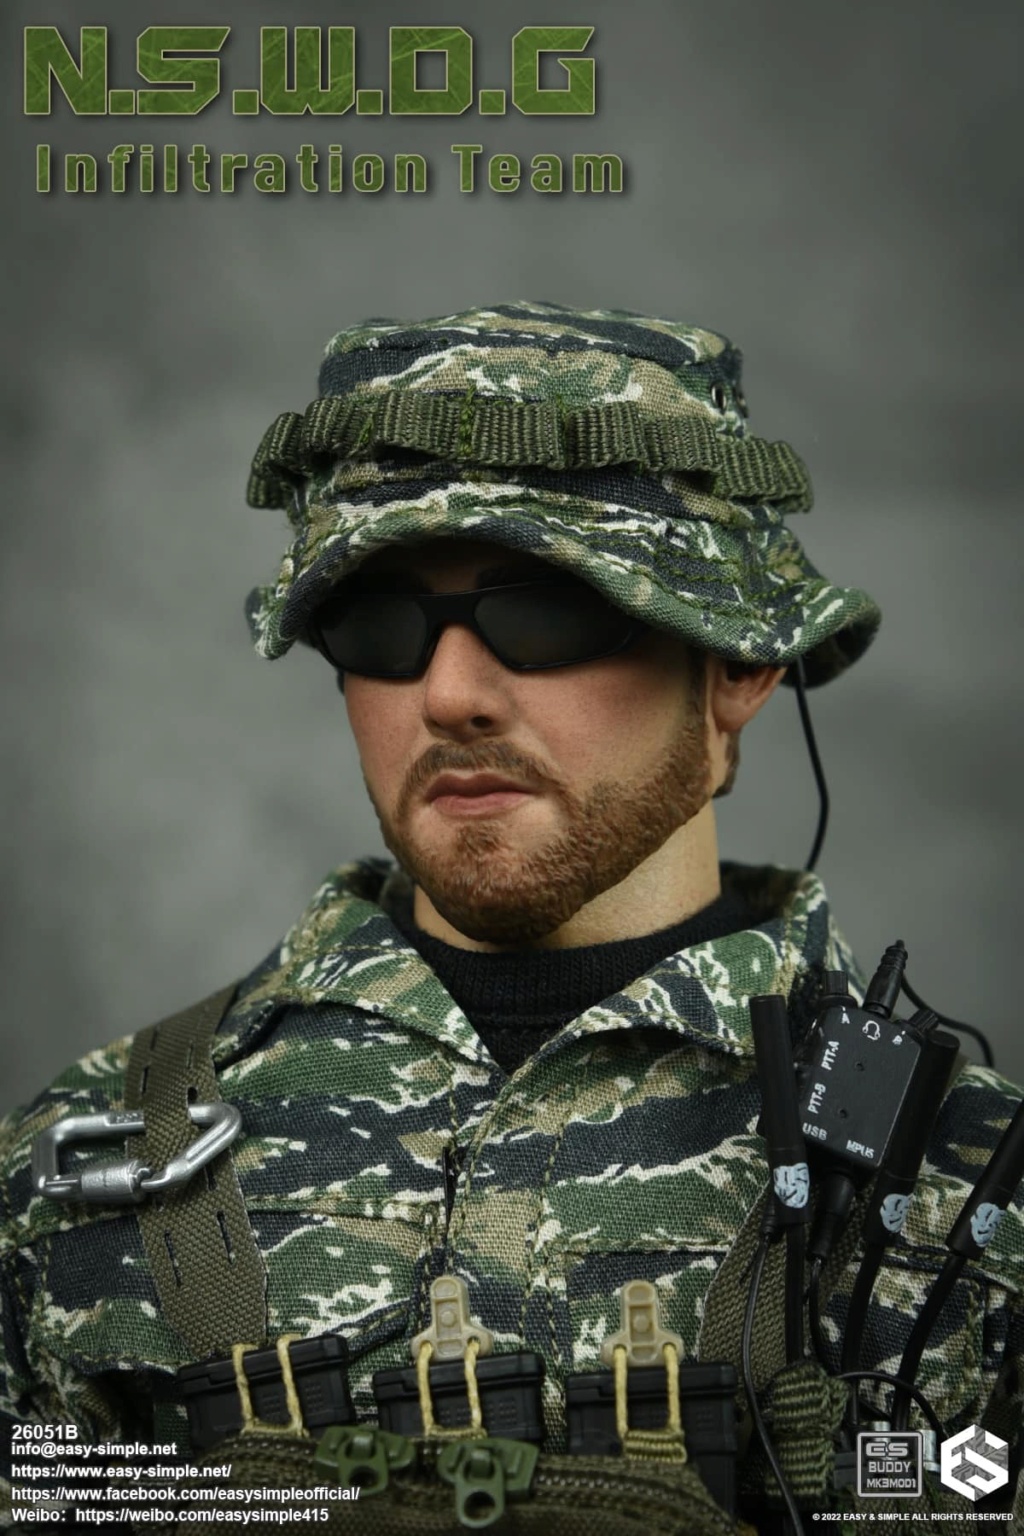 ModernMilitary - NEW PRODUCT: EASY AND SIMPLE 1/6 SCALE FIGURE: N.S.W.D.G INFILTRATION TEAM - (2 Versions) 28118